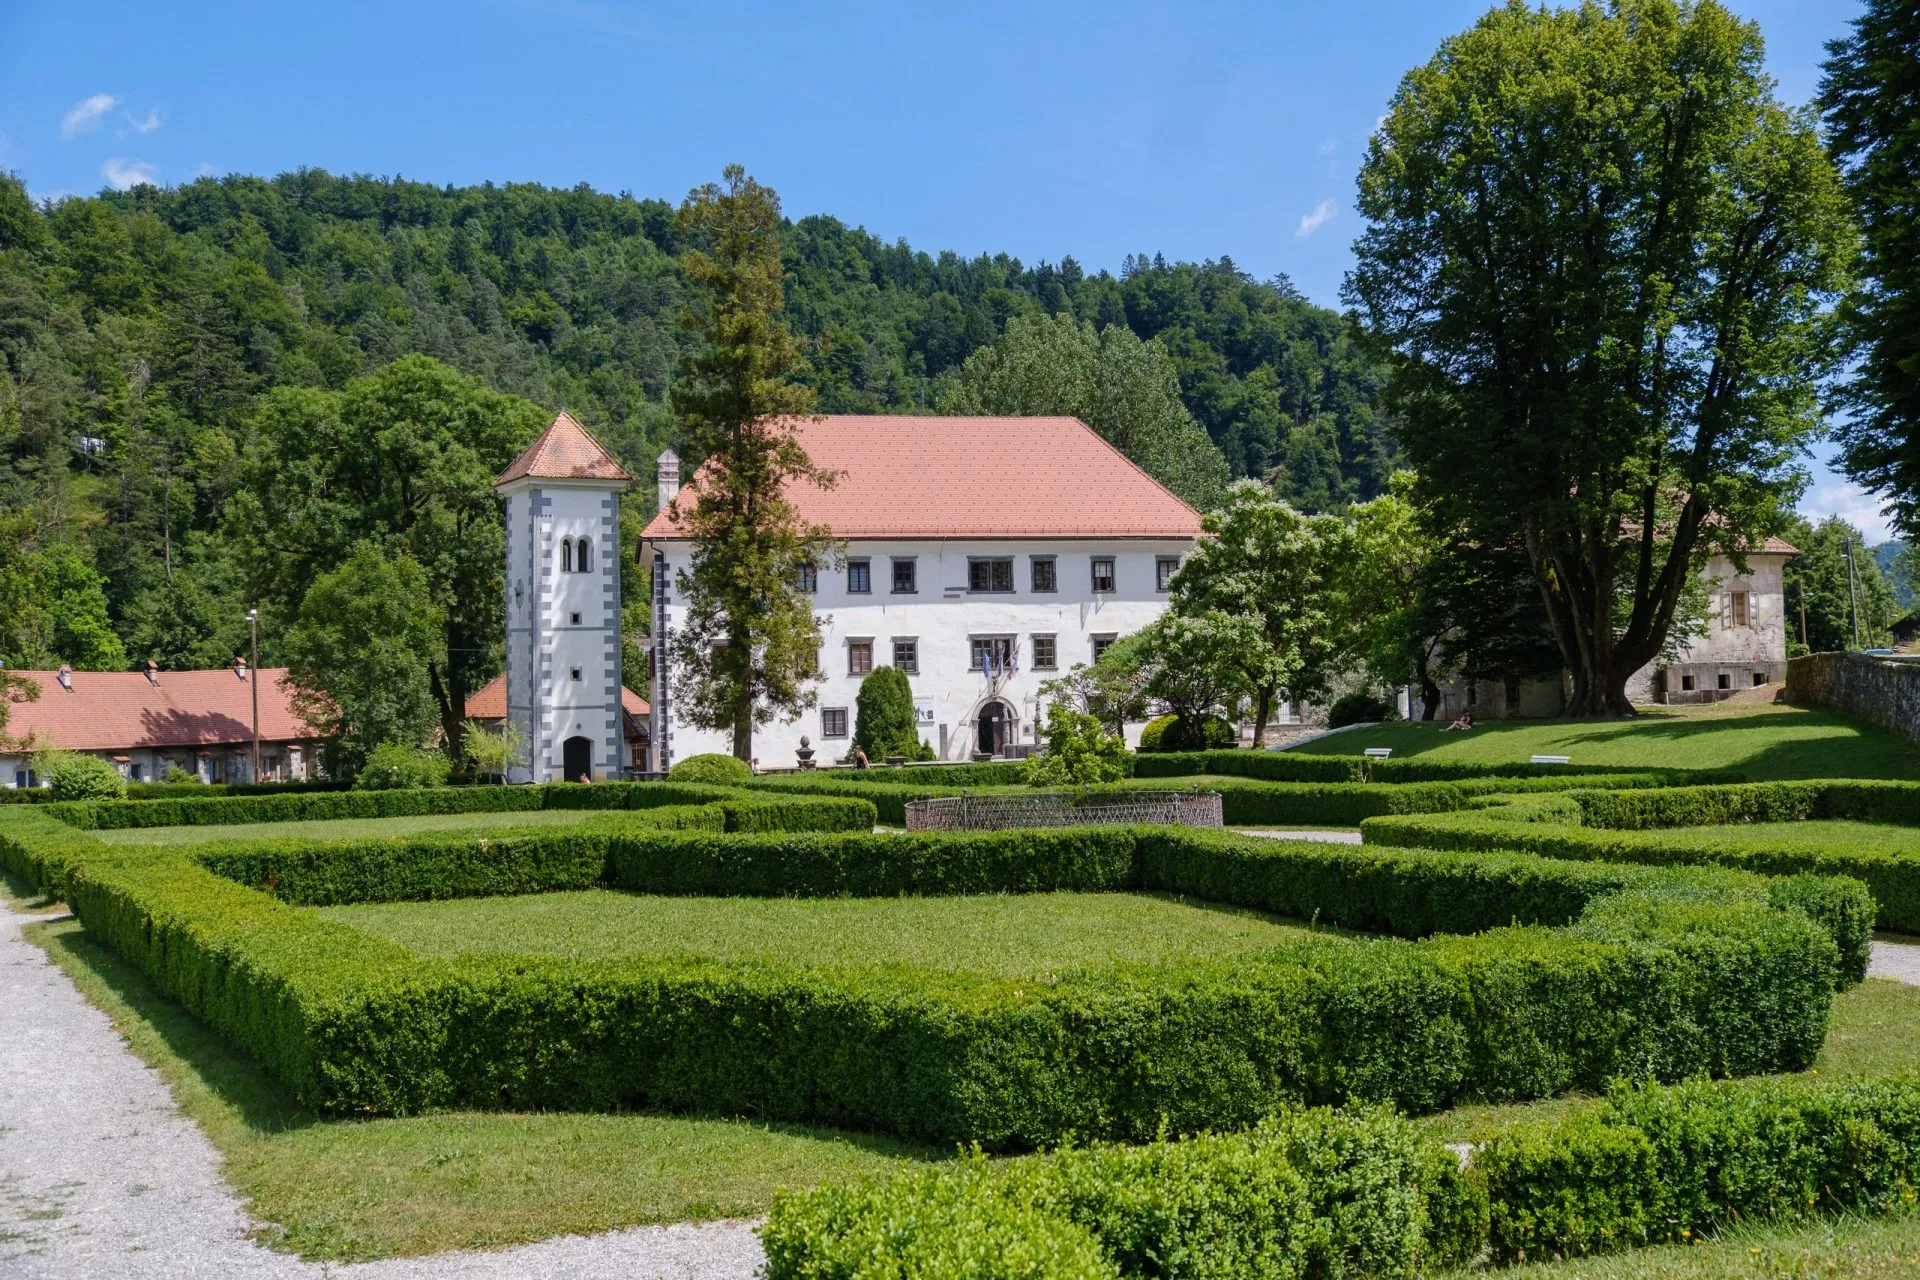 Polhov gradec mansion with blooming garden in summer stockpack adobe stock scaled